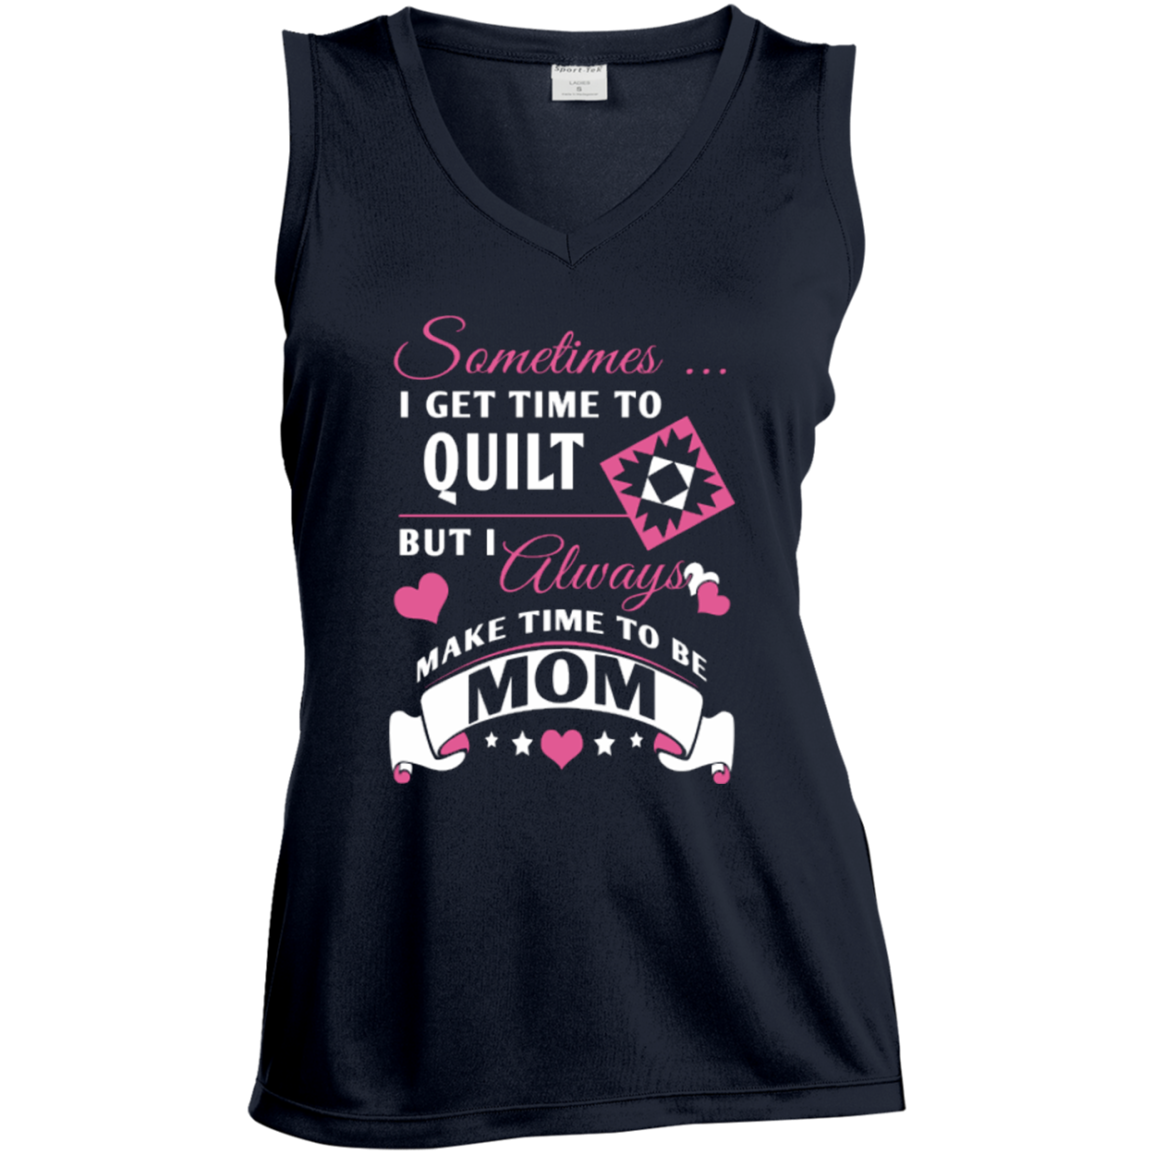 Time-Quilt-Mom Ladies Sleeveless V-Neck - Crafter4Life - 4